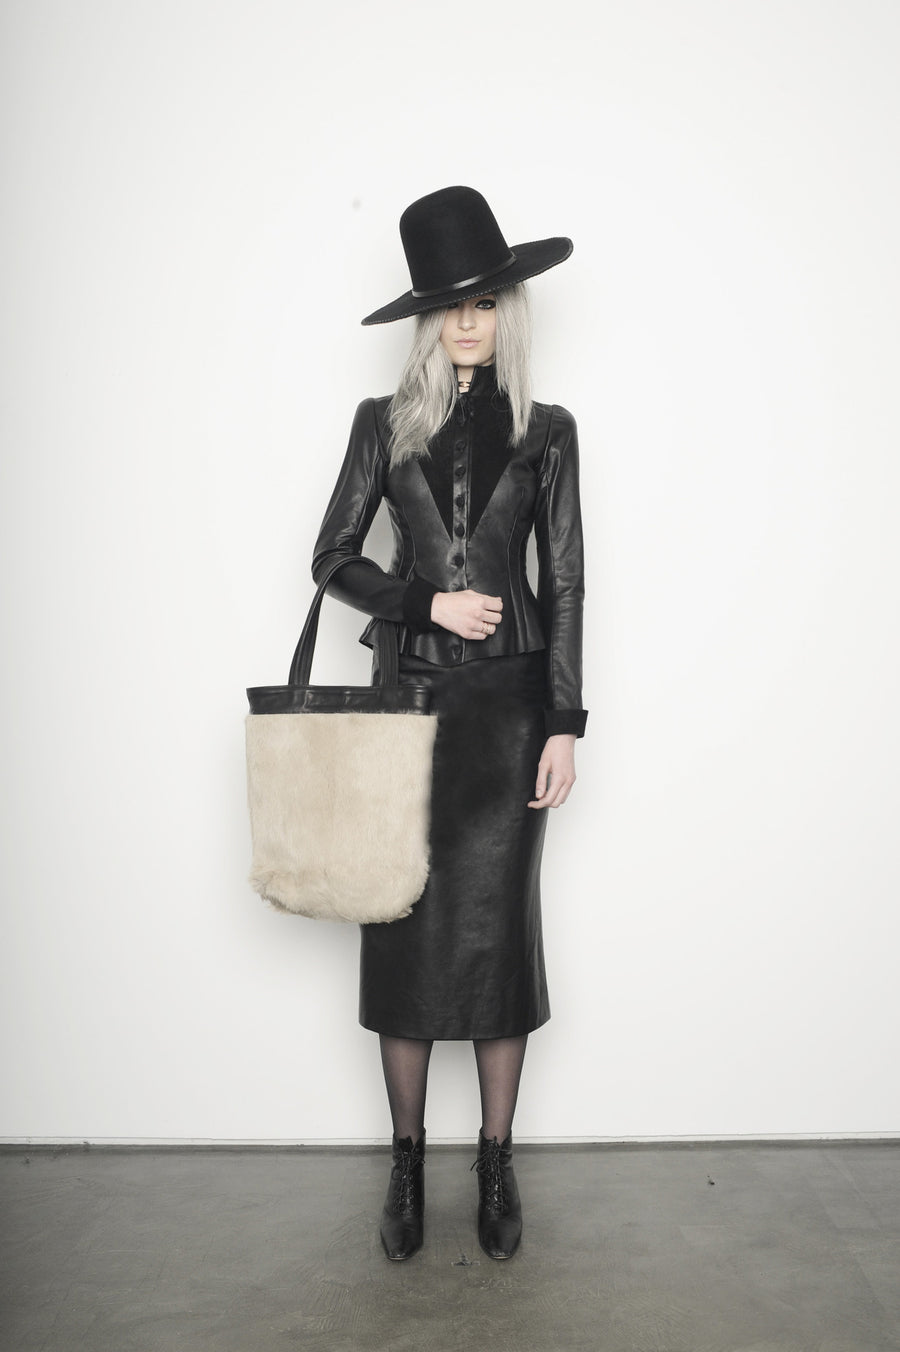 Rachel IMG Model Wendy Nichol Clothing Fashion Designer Runway Show AW15 Queen of Thieves Peaky Blinders Witch Plonge Soft Leather Black Suede Victorian Fitted Jacket Coat Fitted Tight Leather Skirt Handmade in NYC Custom Tailoring Fabric Color Made to Measure Order